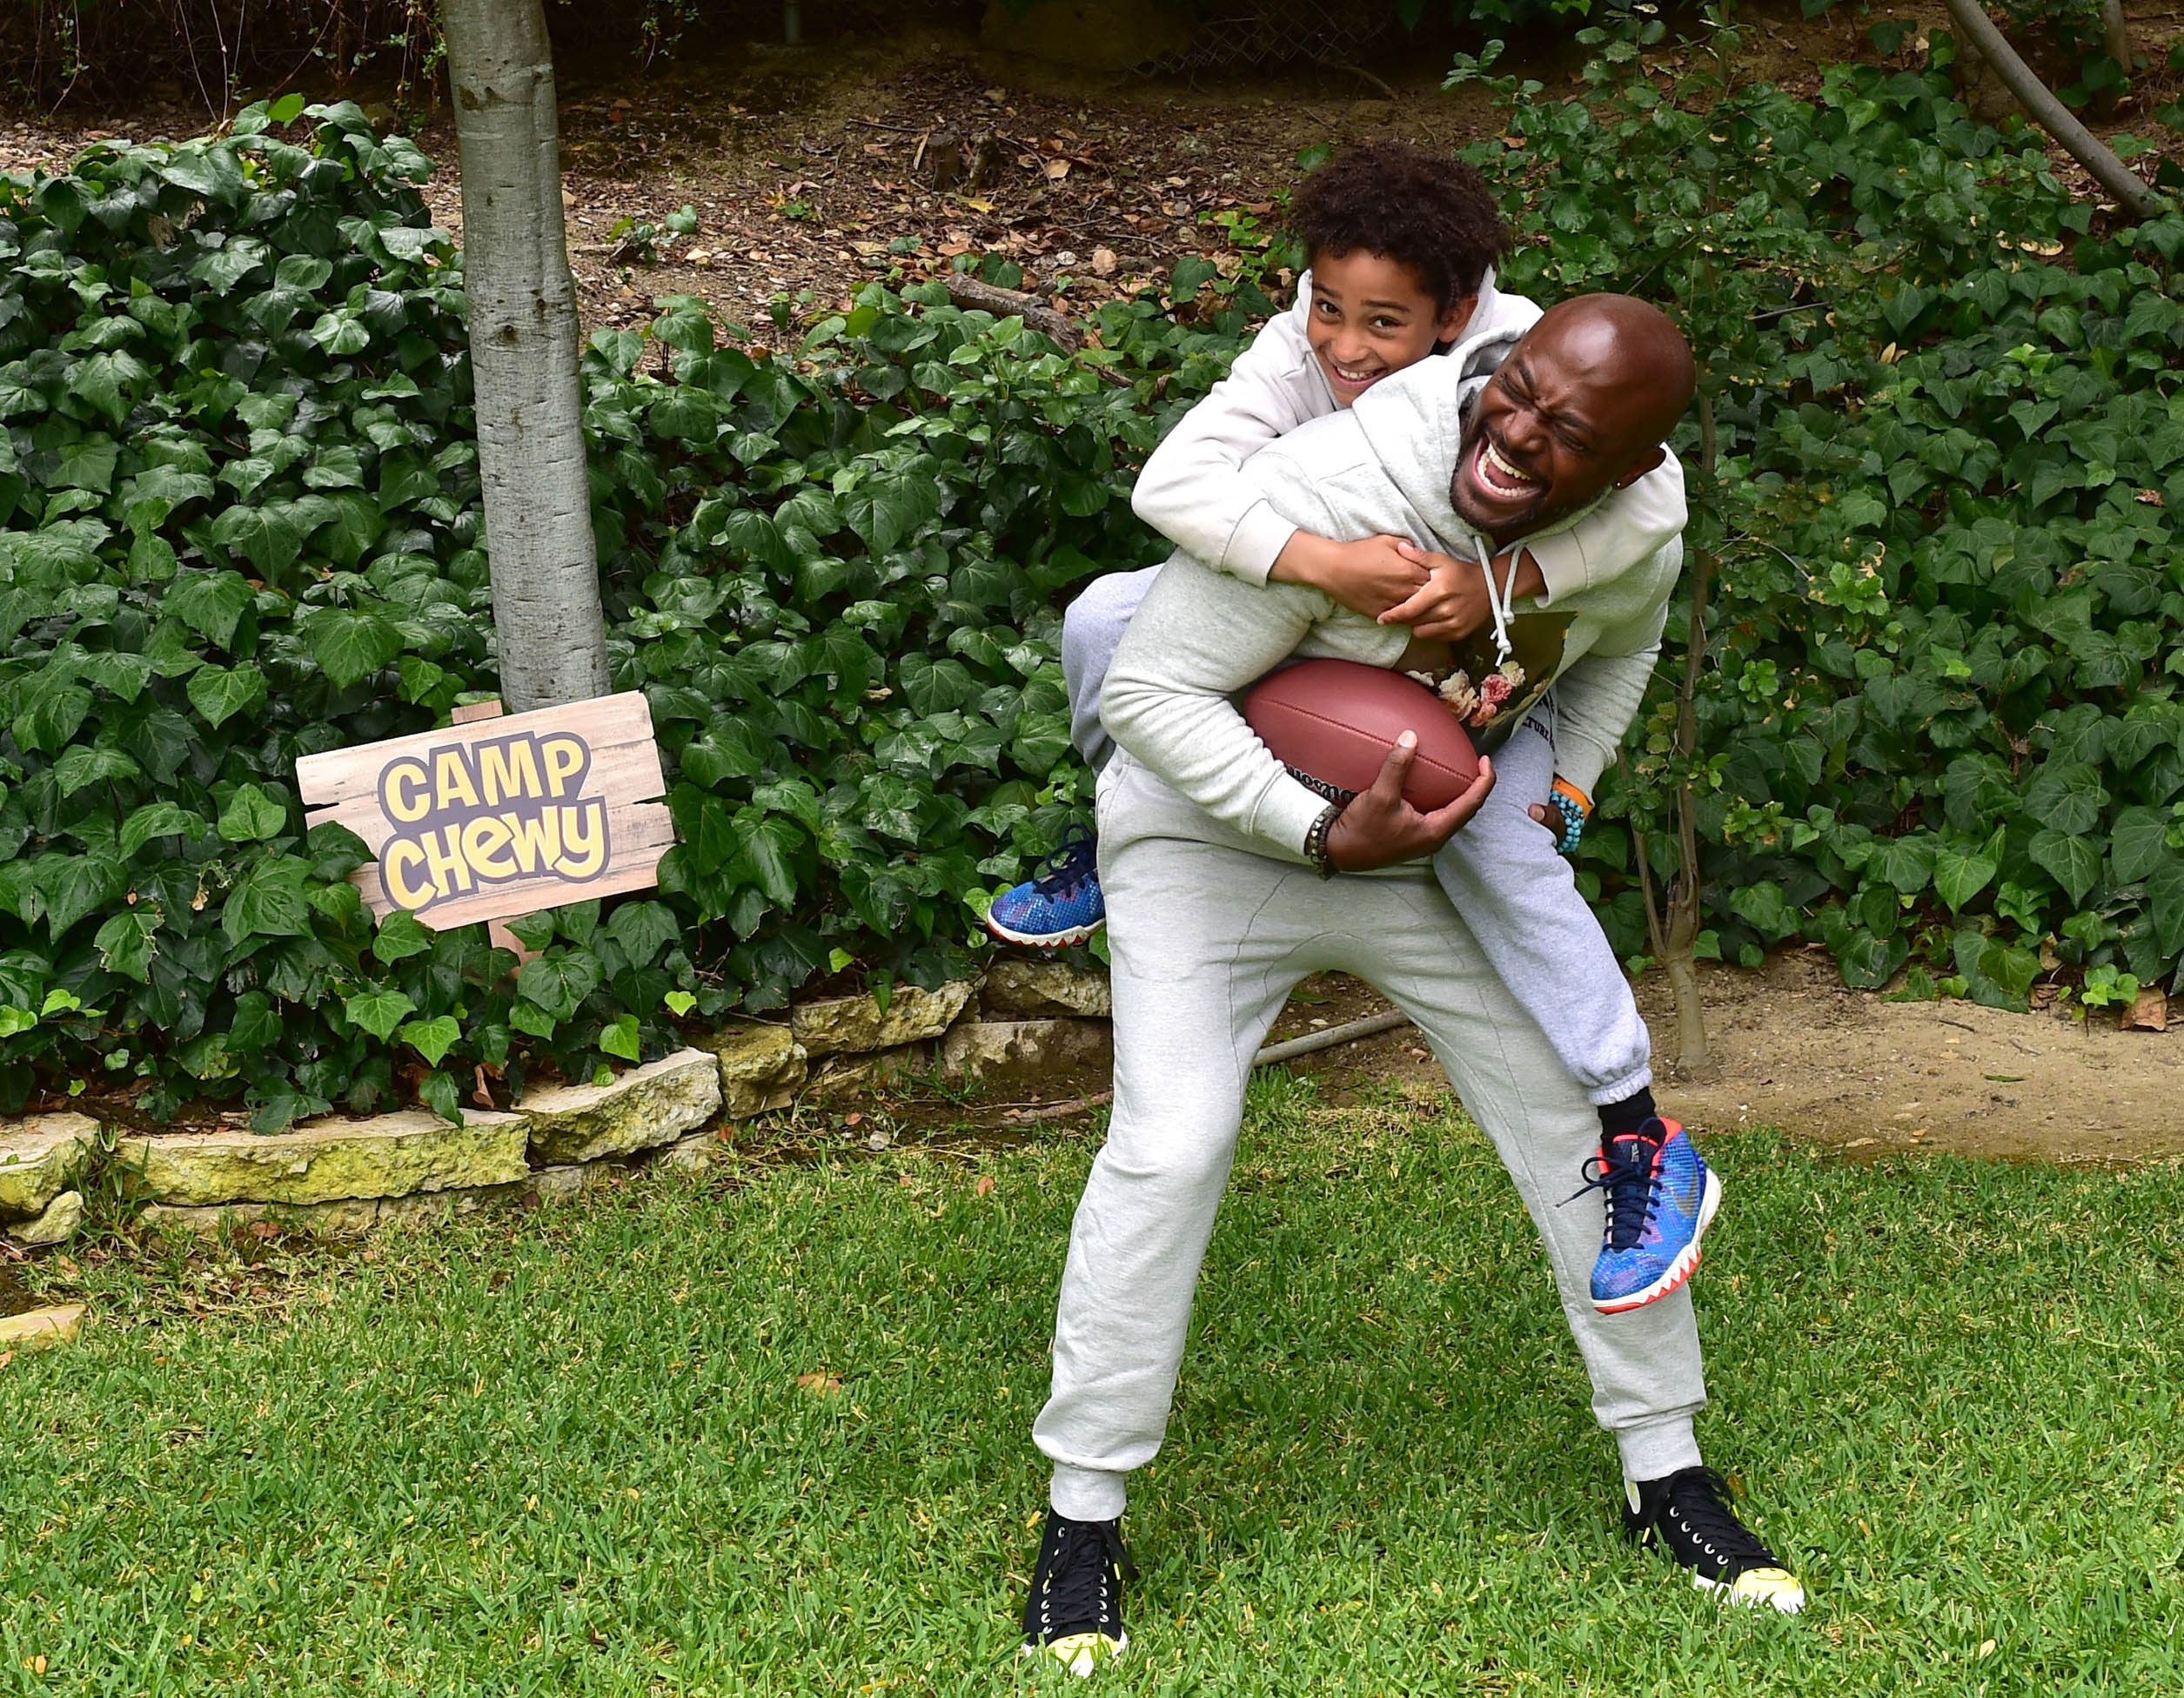 Taye Diggs and son, Walker, for Quaker Chewy